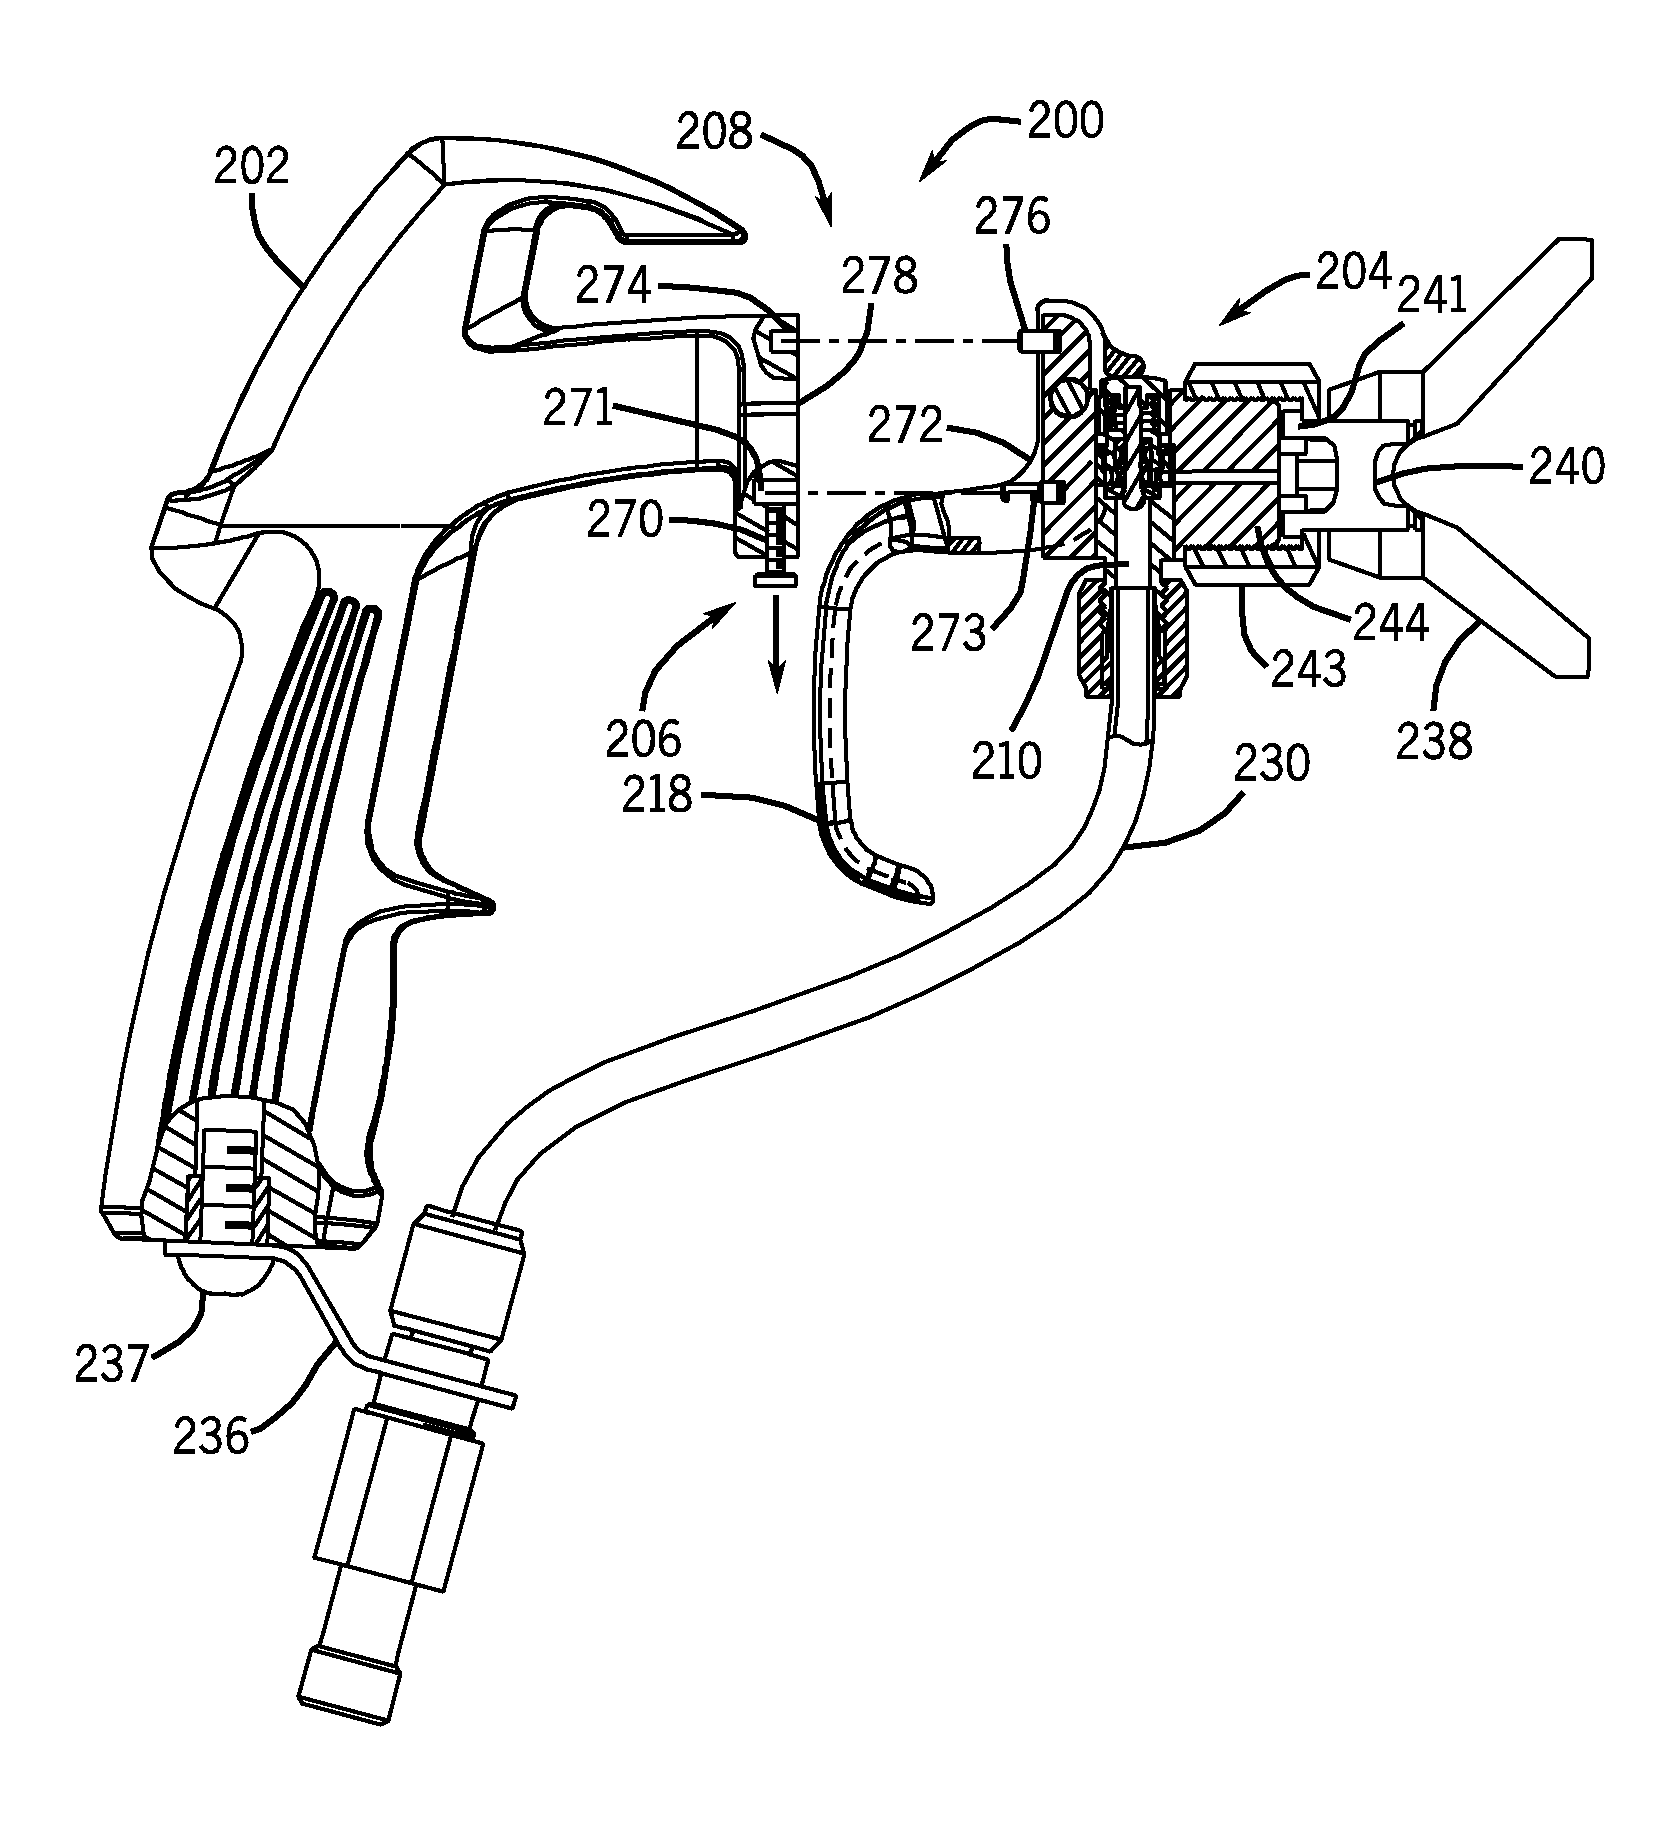 Airless spray gun having a removable valve cartridge and protective insert